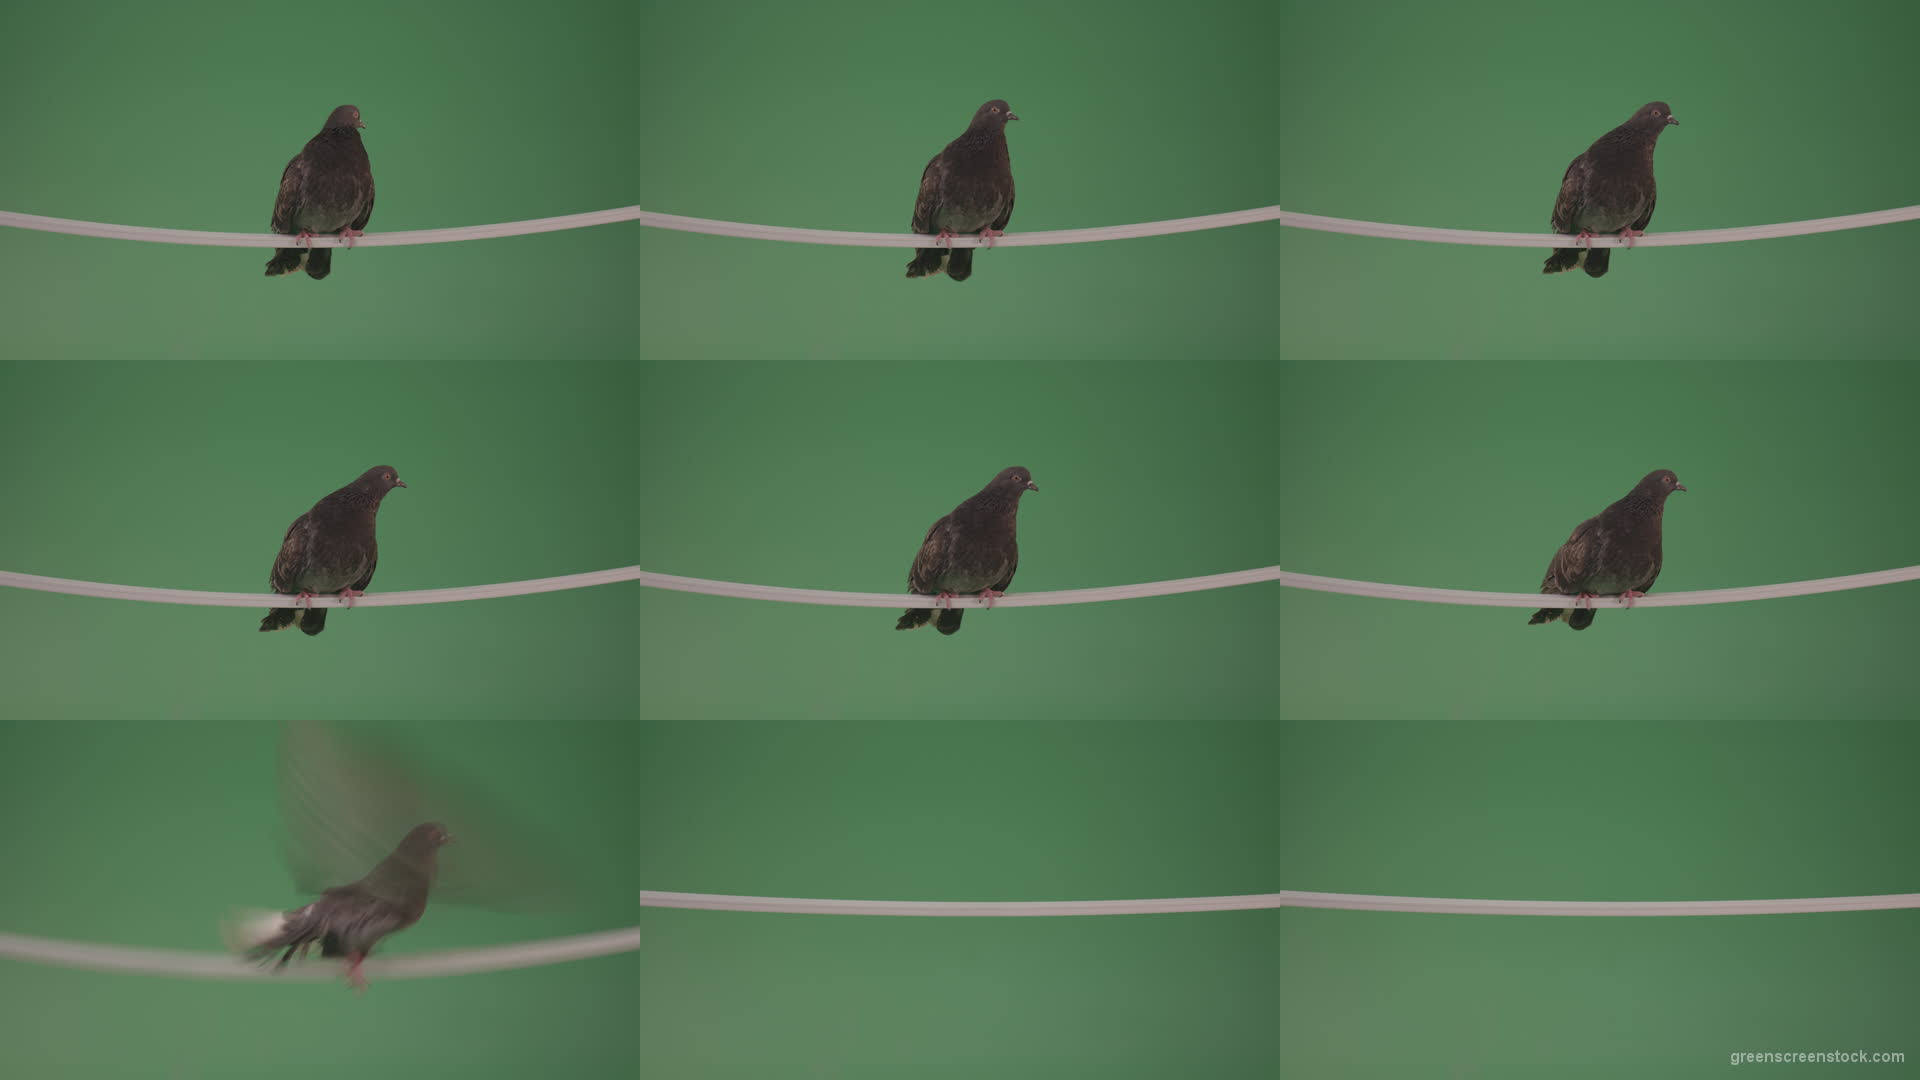 Bird-of-gray-color-doves-flies-from-branch-to-heaven-isolated-on-chromakey-background Green Screen Stock